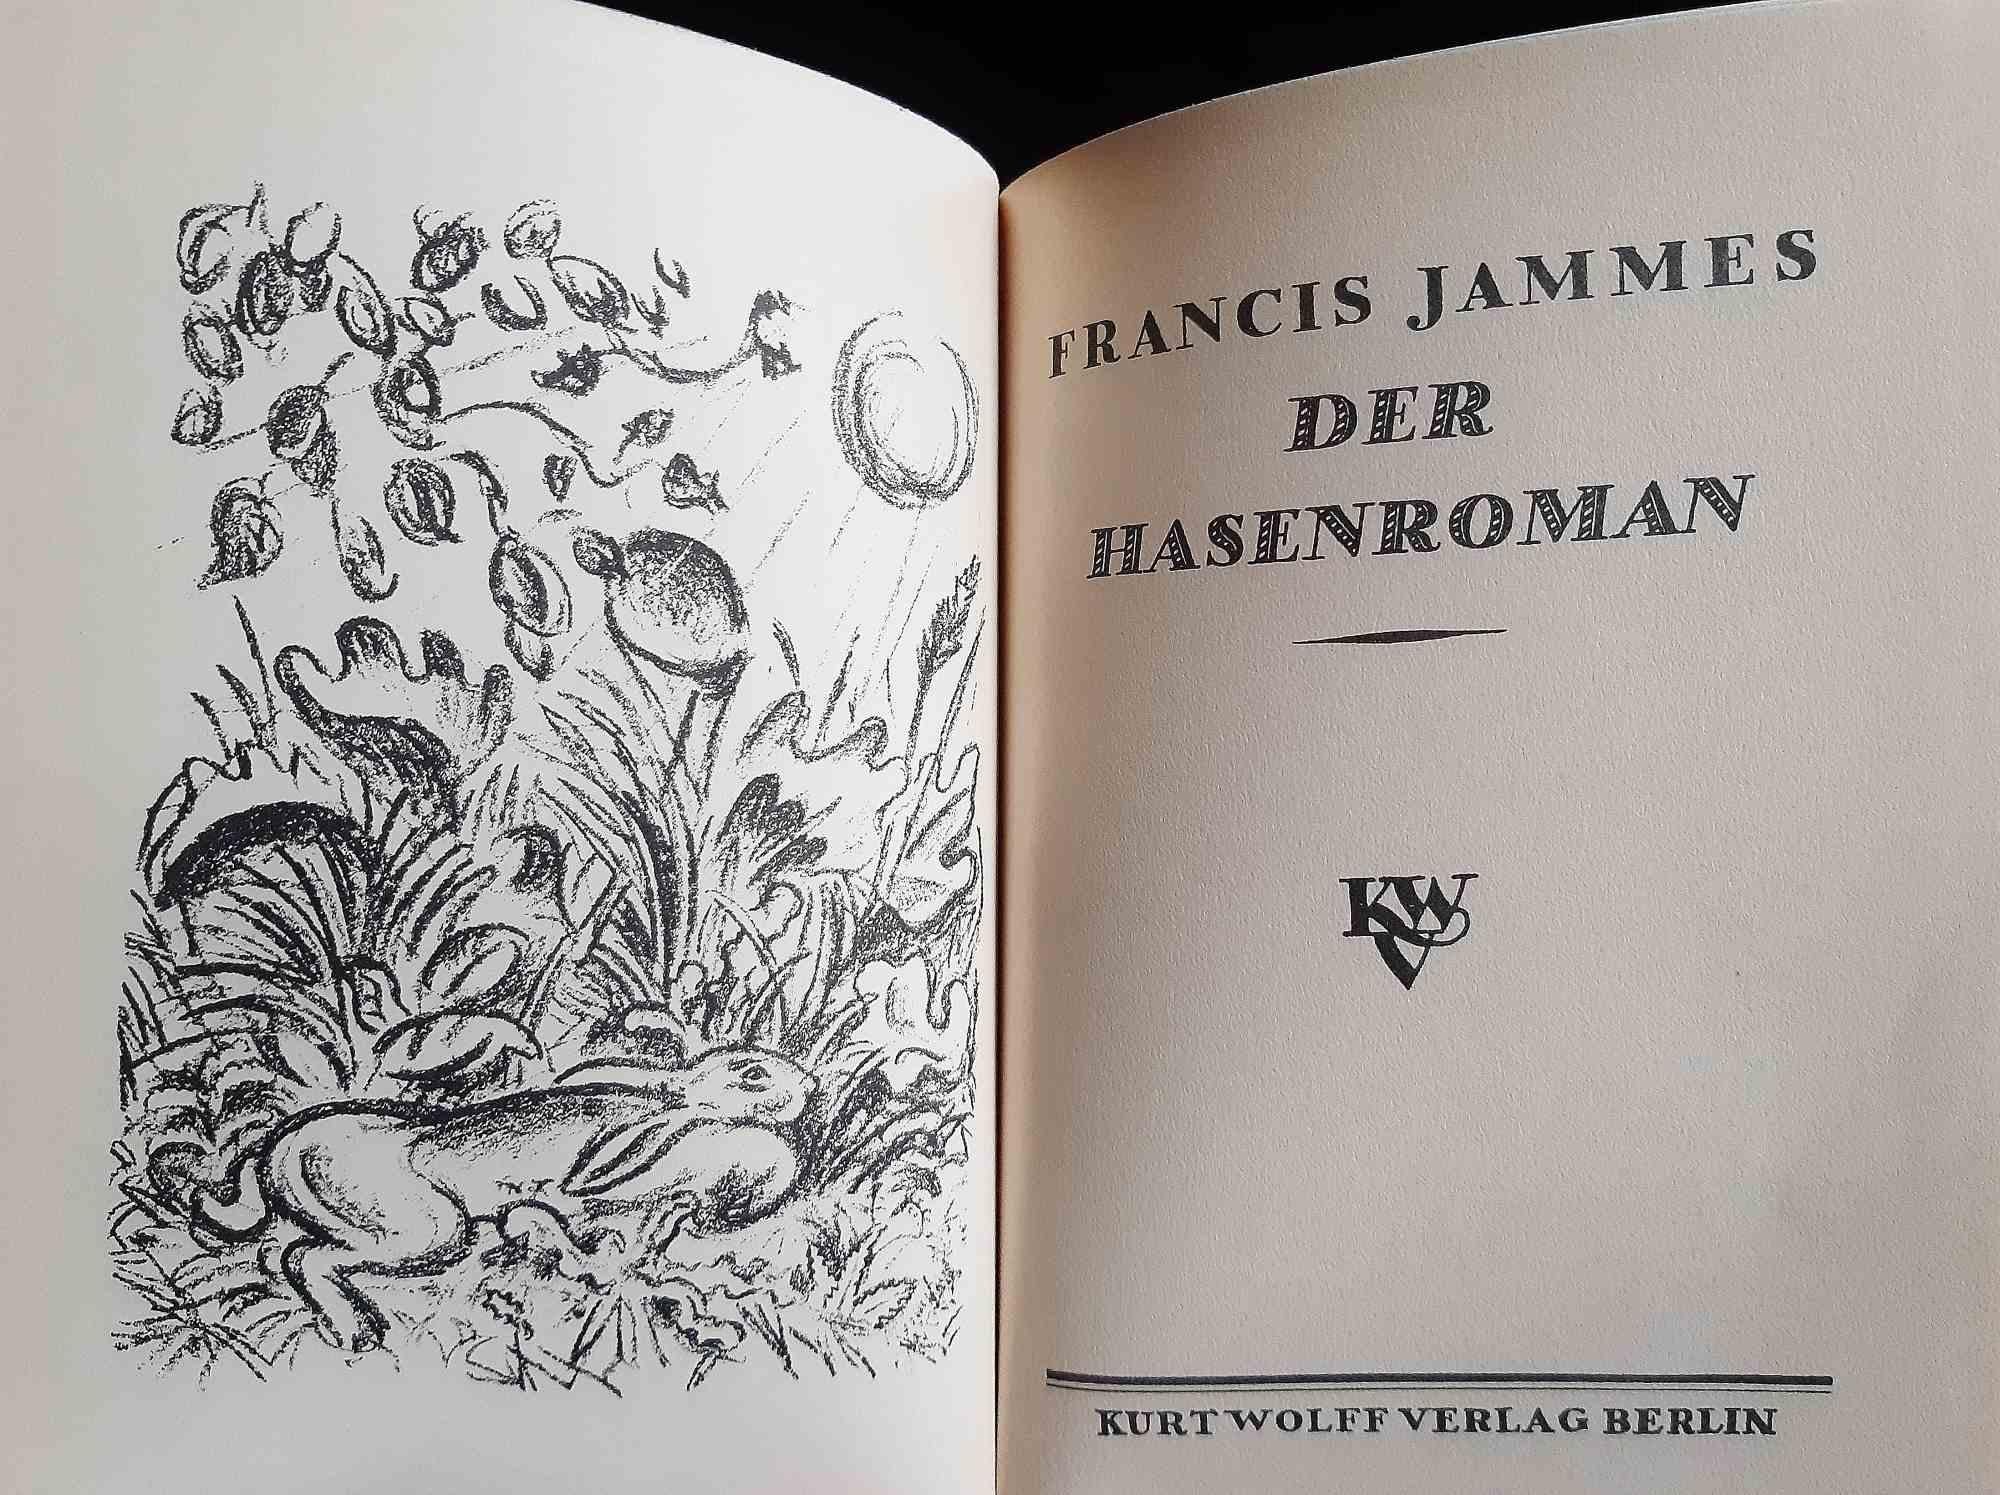 Der Hasenroman is an book written by Francis Jammes (Tournay, 1868 - Hasparren, 1938) and illustrated by Richard Seewald (1889-1976) in 1916.

Original First Edition.

Published by Kurt Wolff, Leipzig.

Format: small 4°. The dimensions of the book